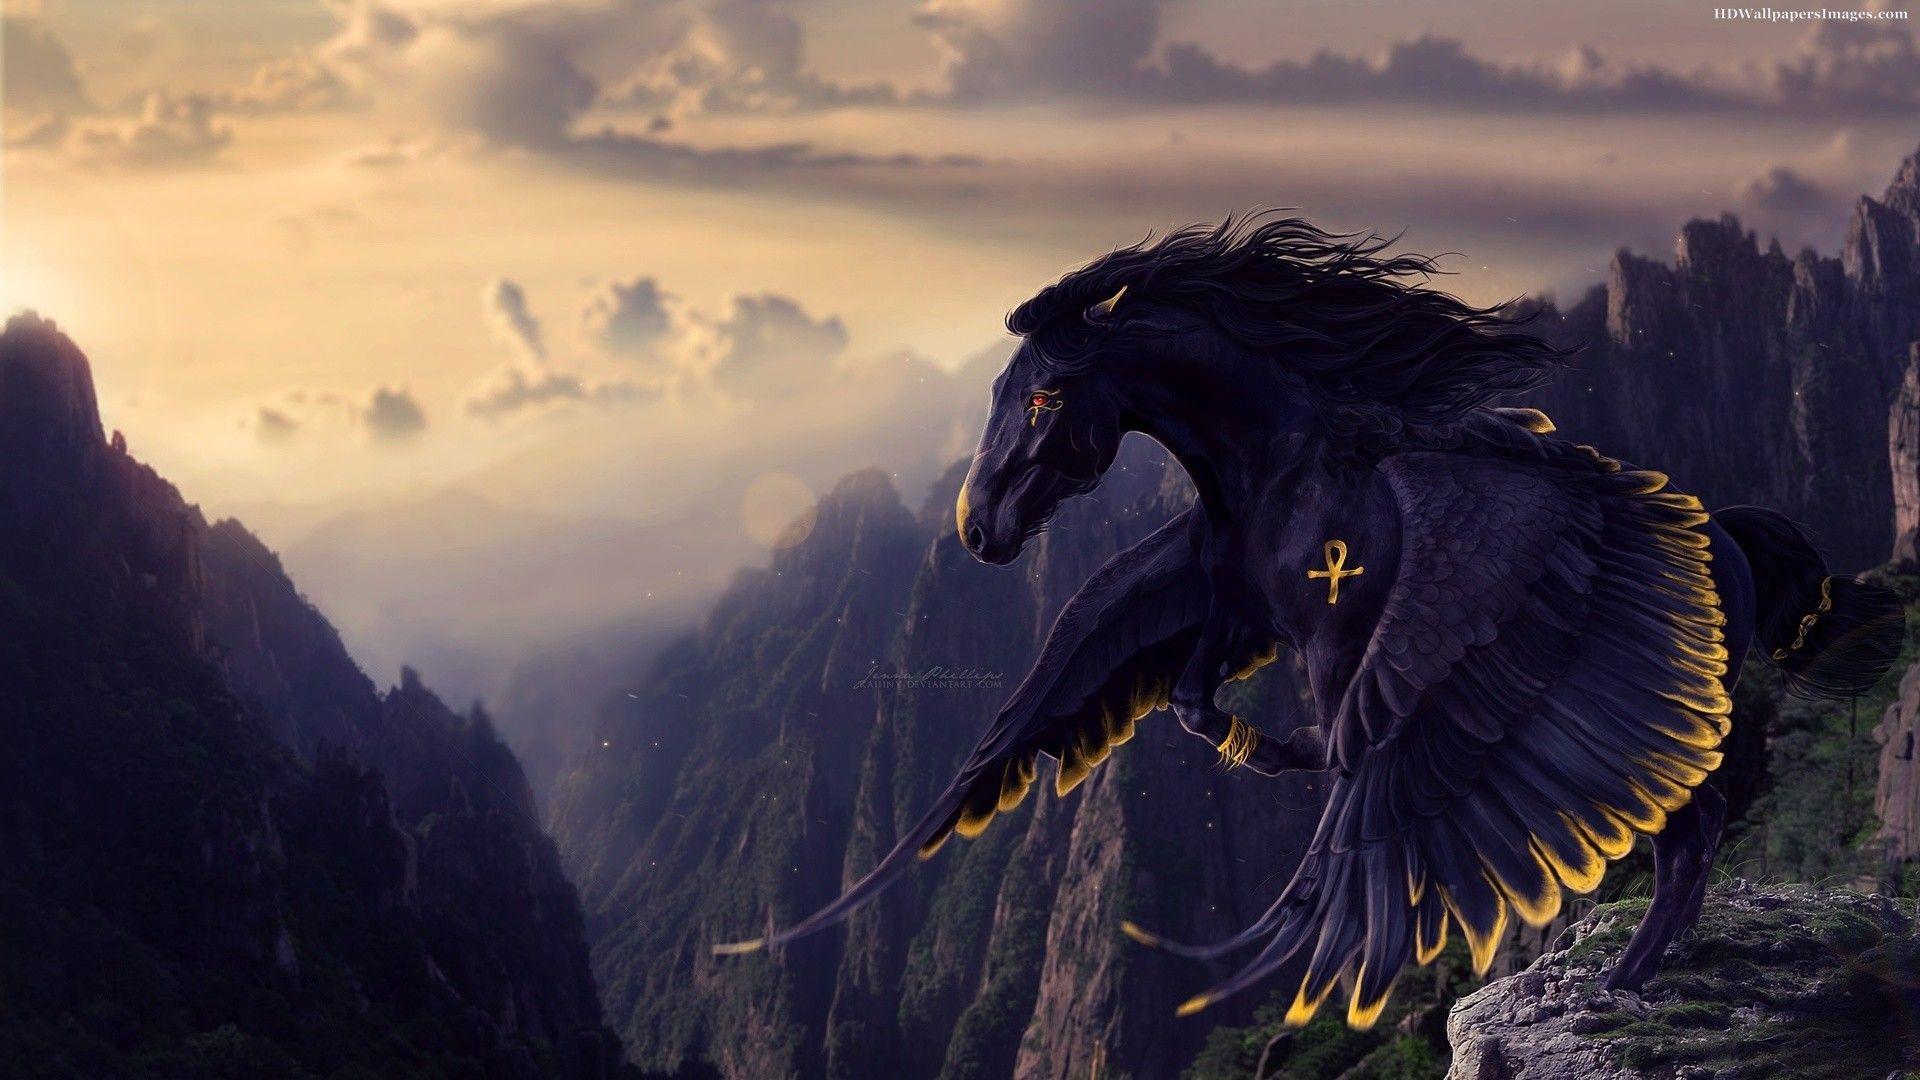 fantasy horses image. Black Horse Wings Image, Picture, Photo